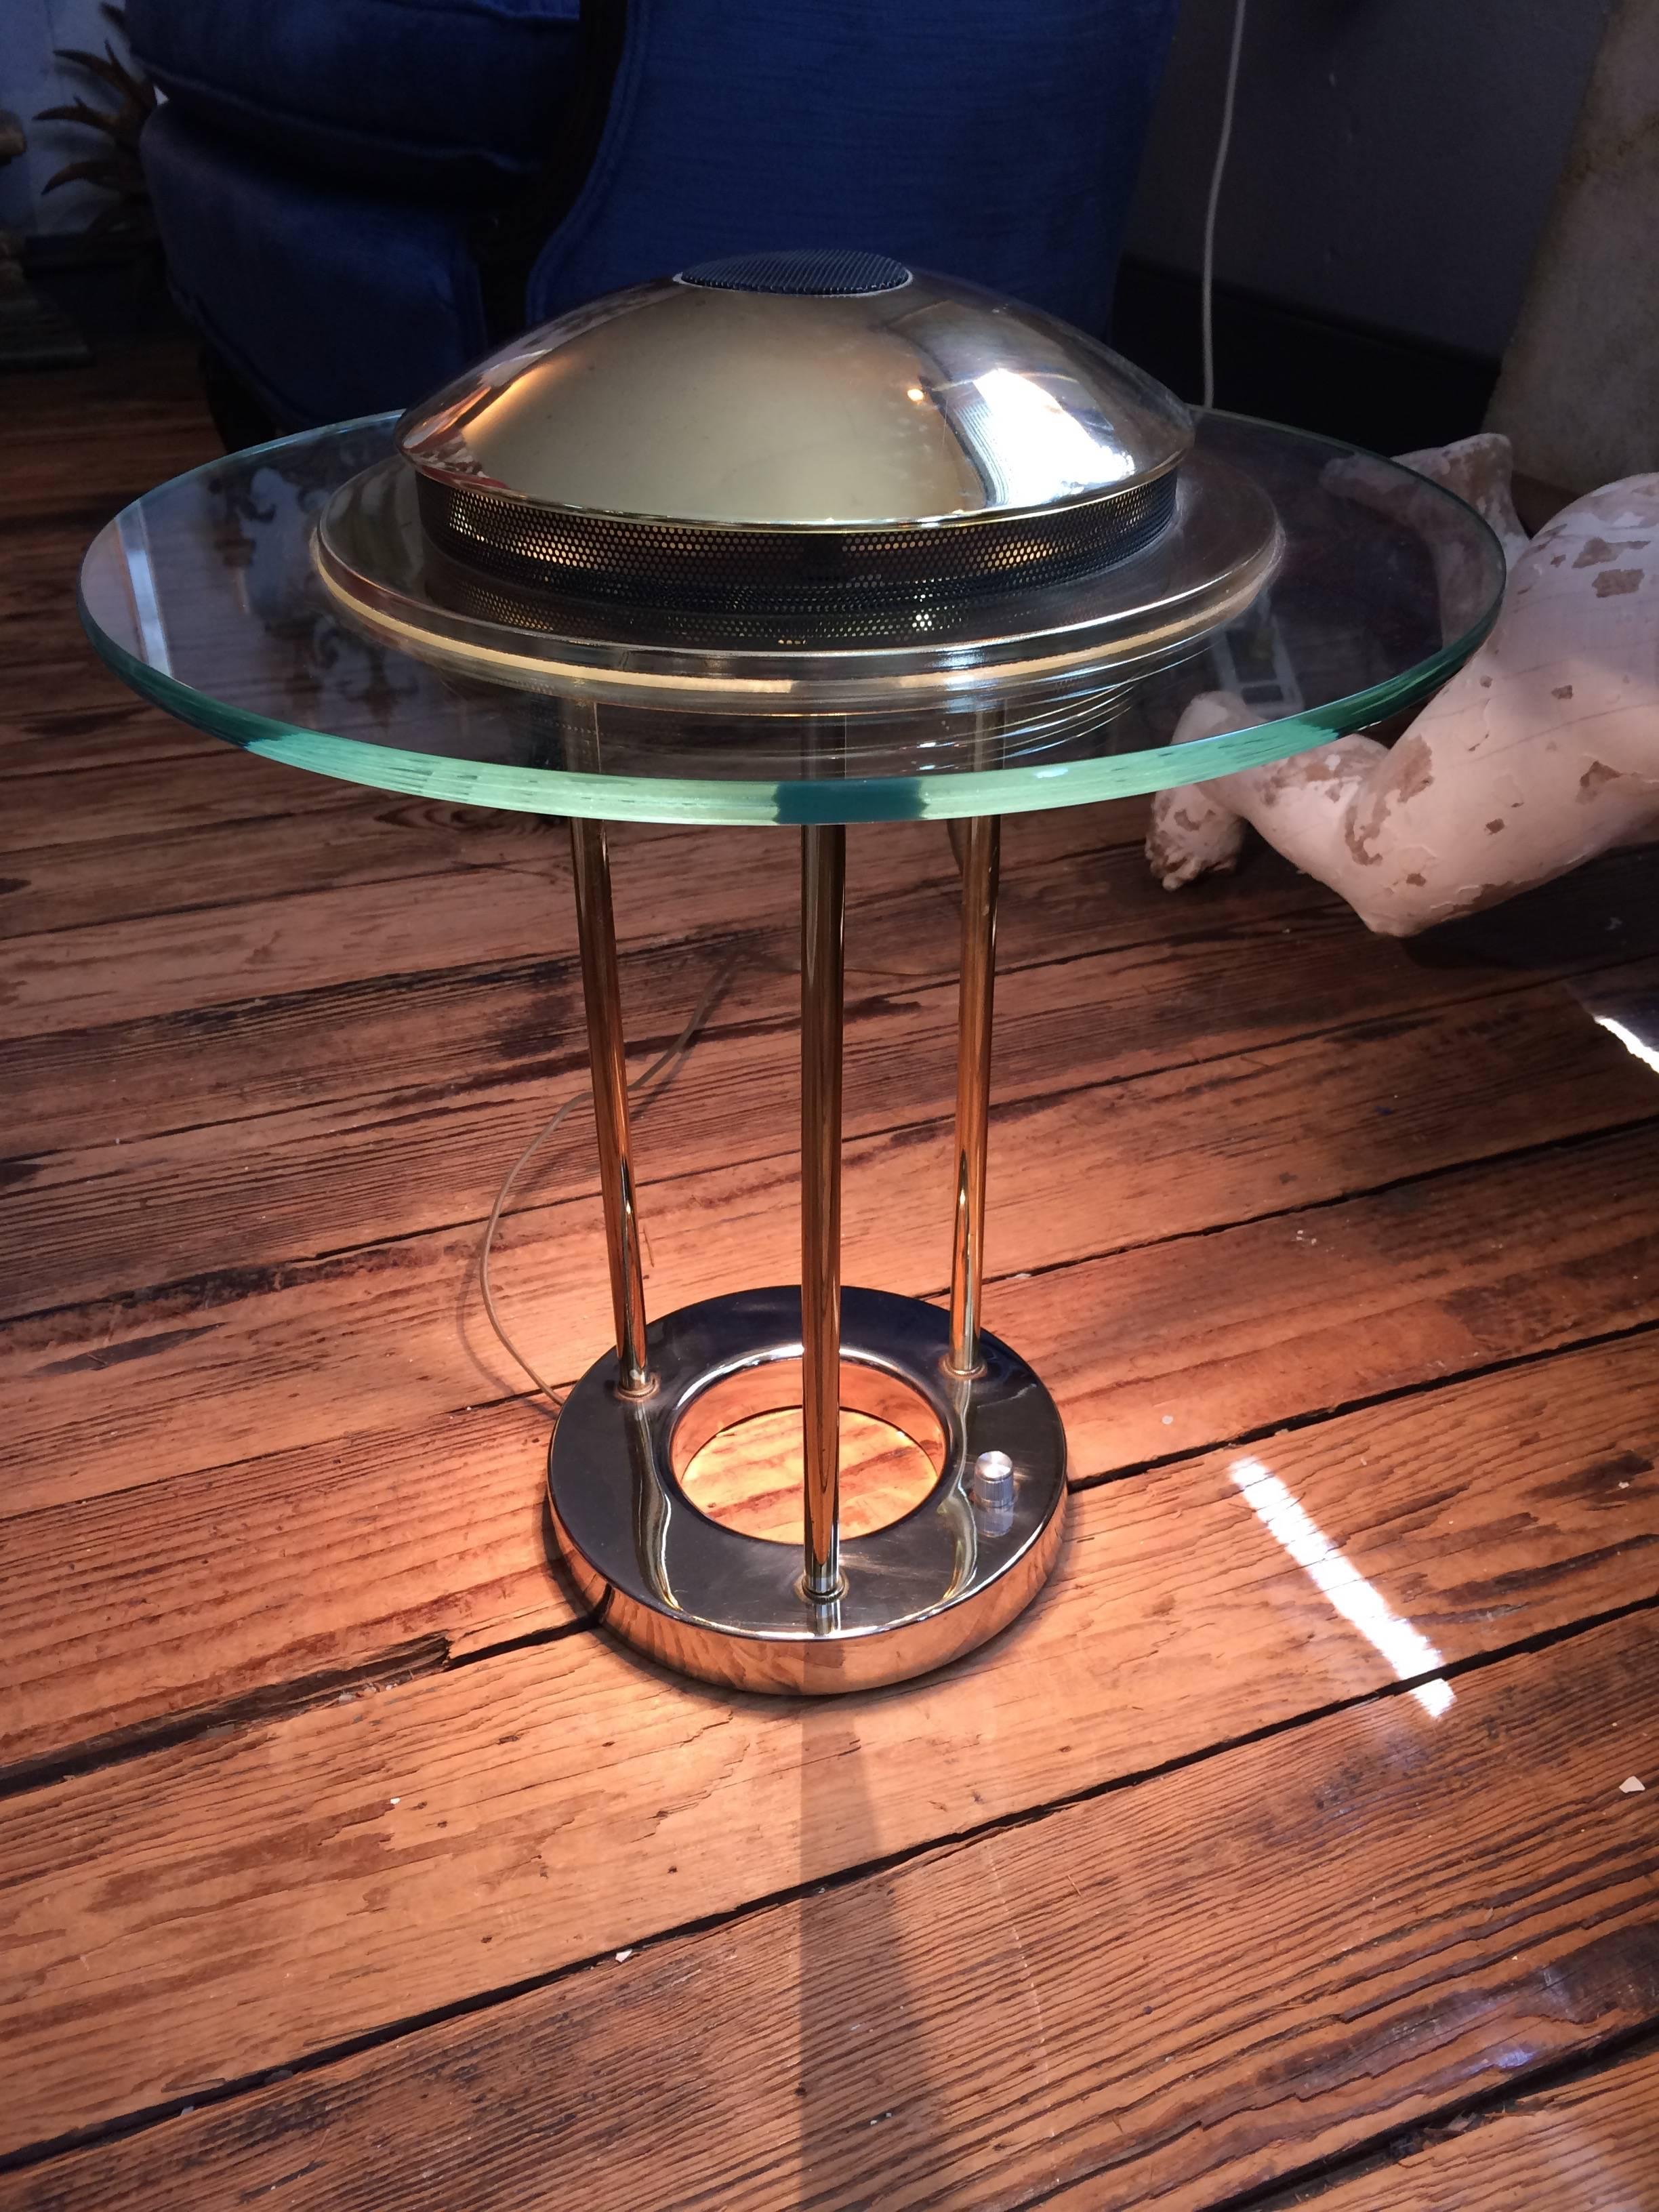 Fantastic 1980s Robert Sonneman designer desk lamp for George Kovacs - glass saturn style top with brass rods and polished zinc base. Zinc base is 8 inches diameter.
SW